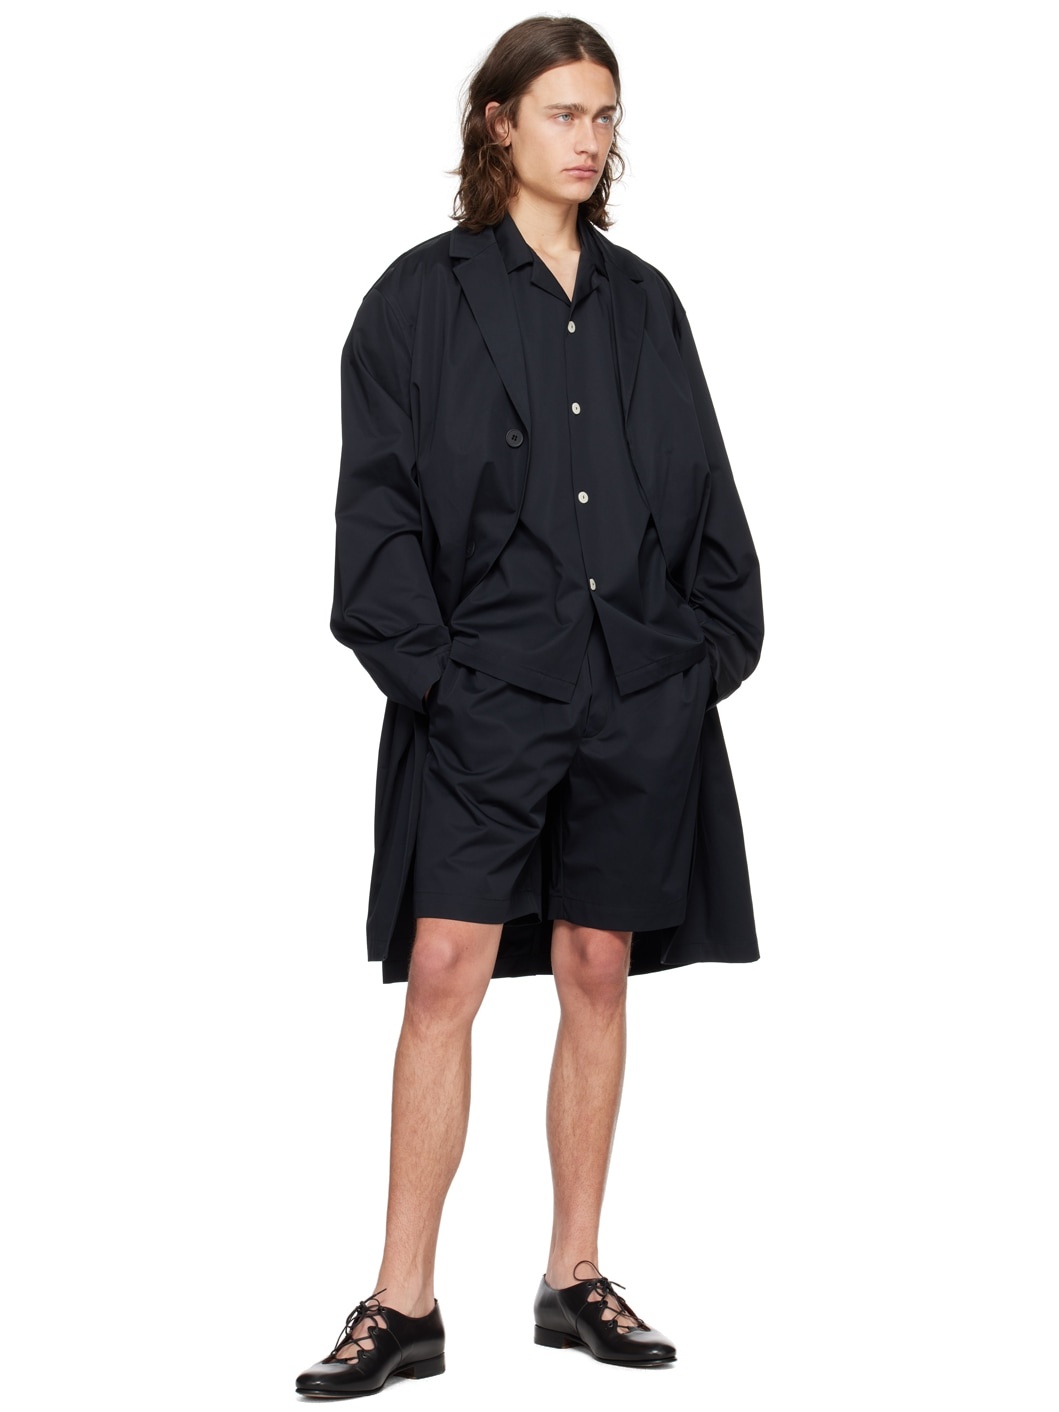 Black Notched Lapel Trench Coat - 4